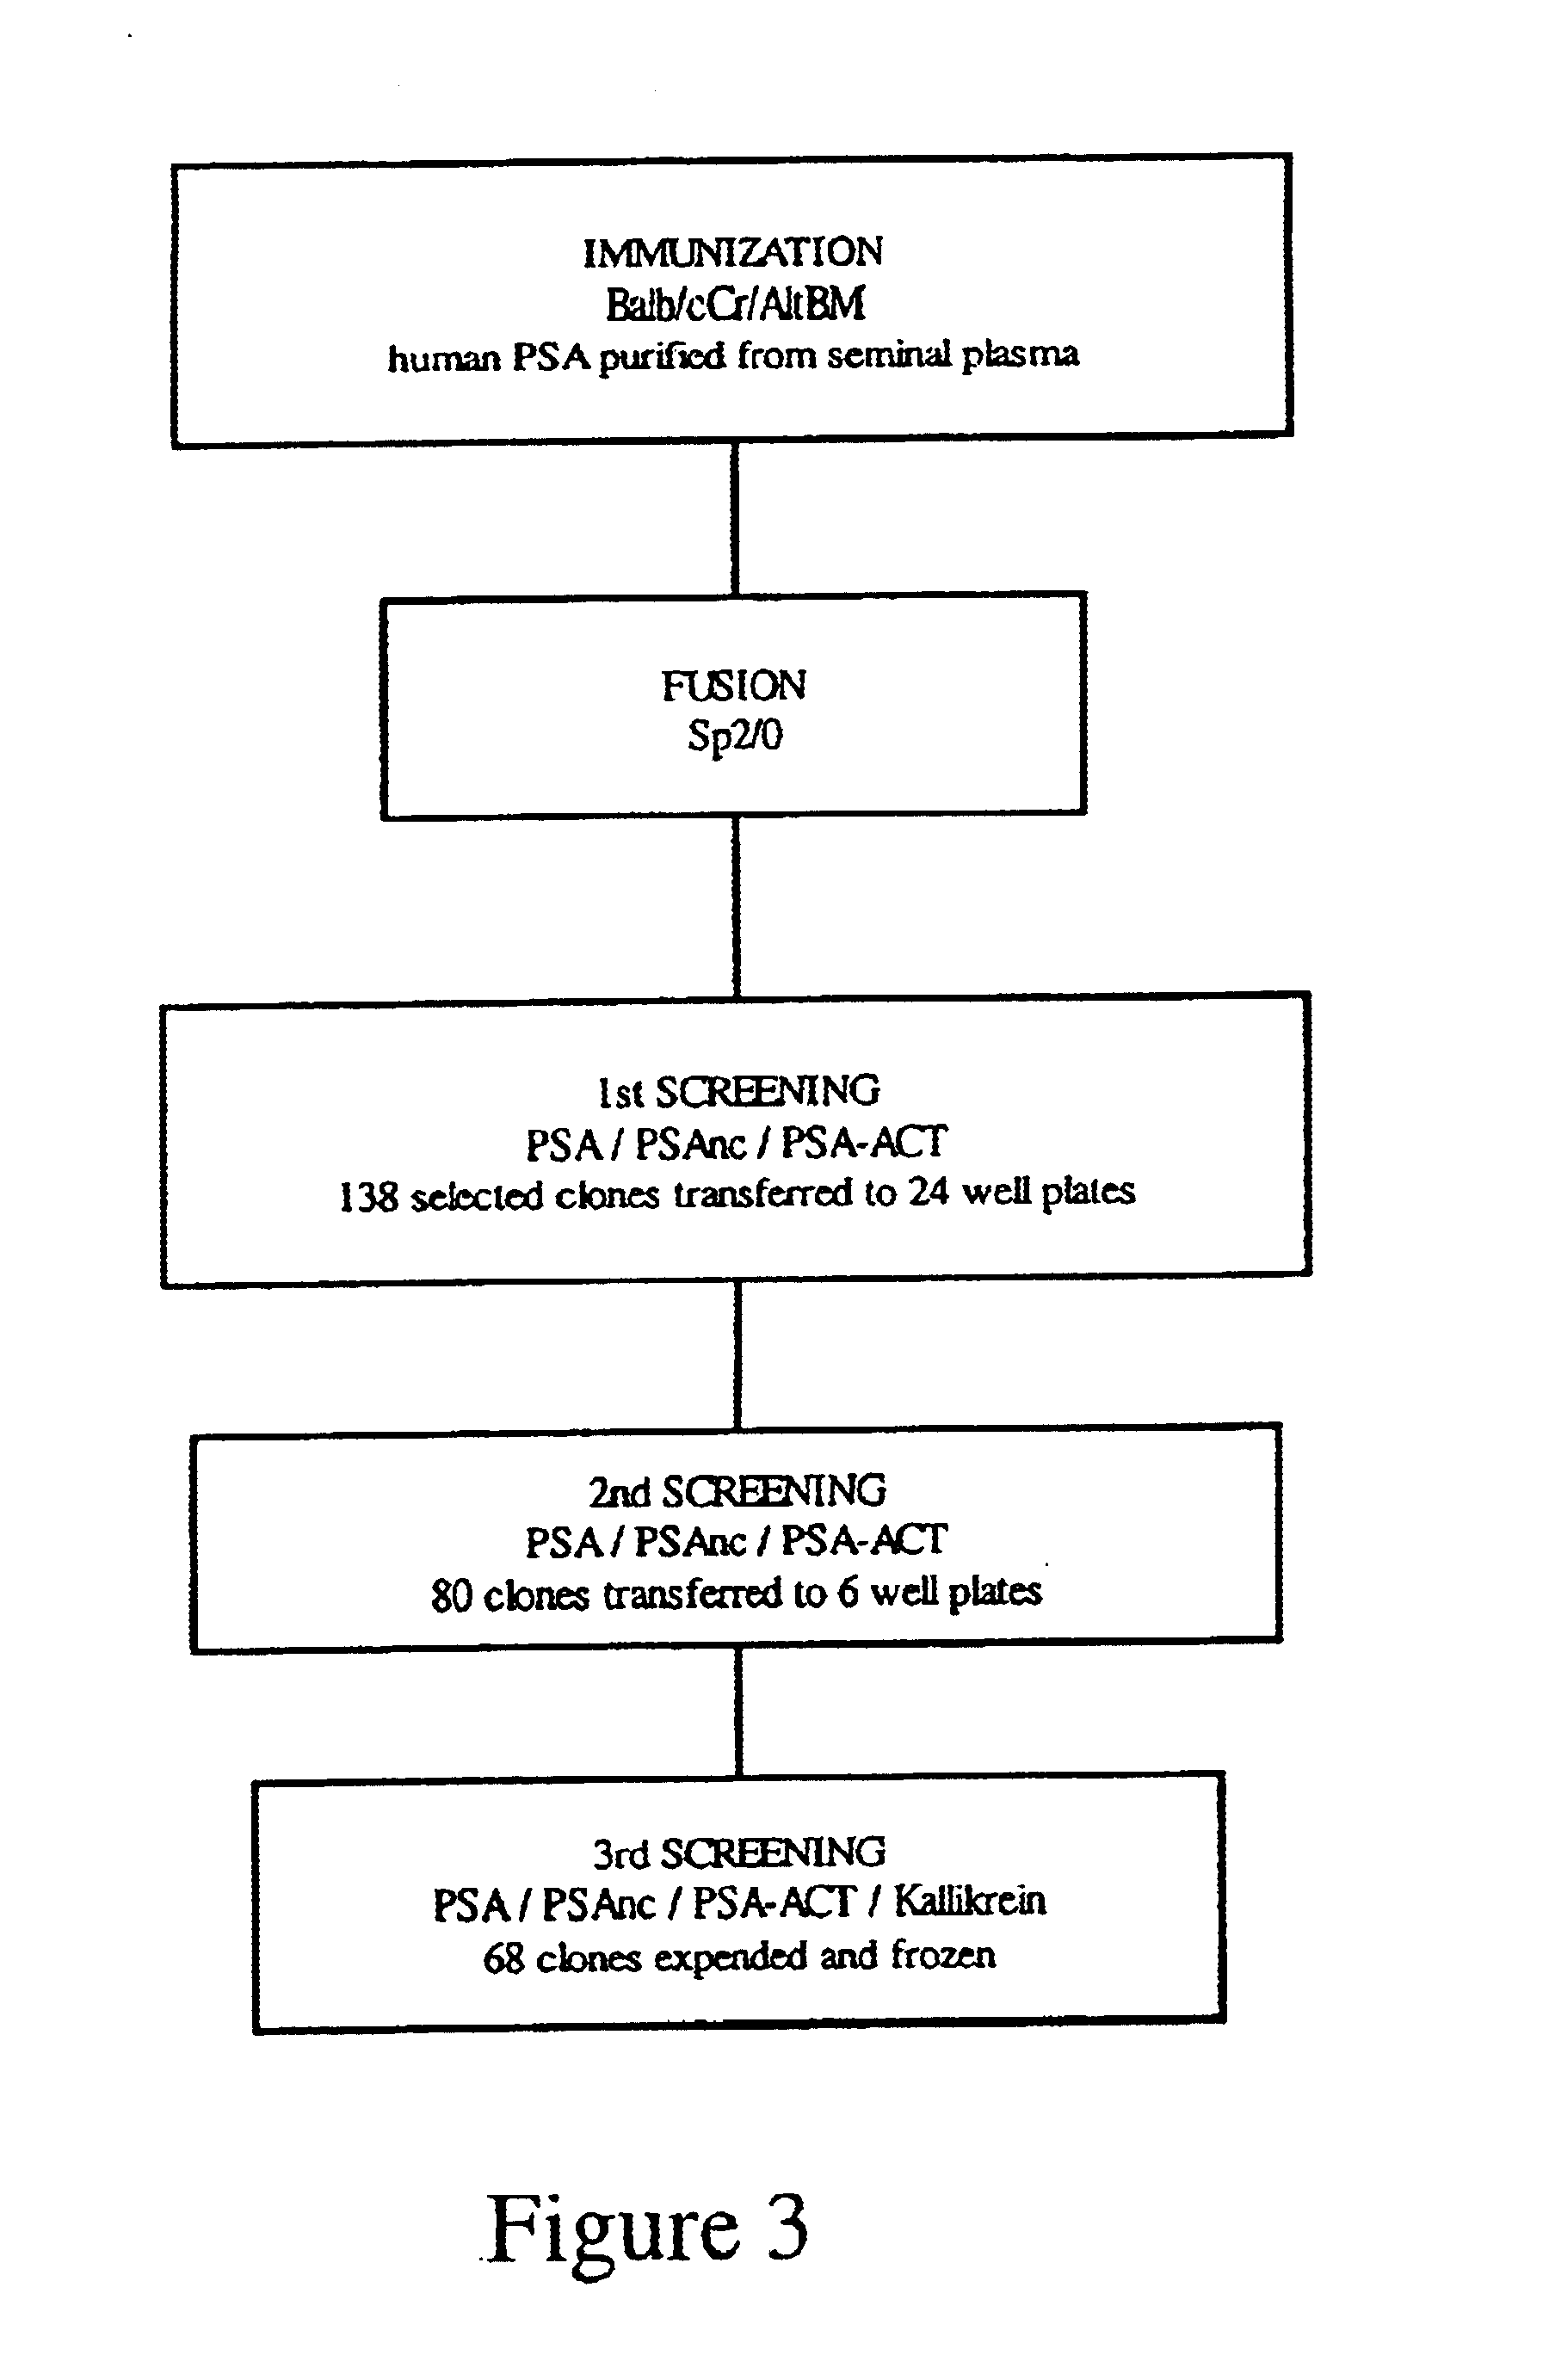 Reagents and methods for inducing an immune response to prostate specific antigen